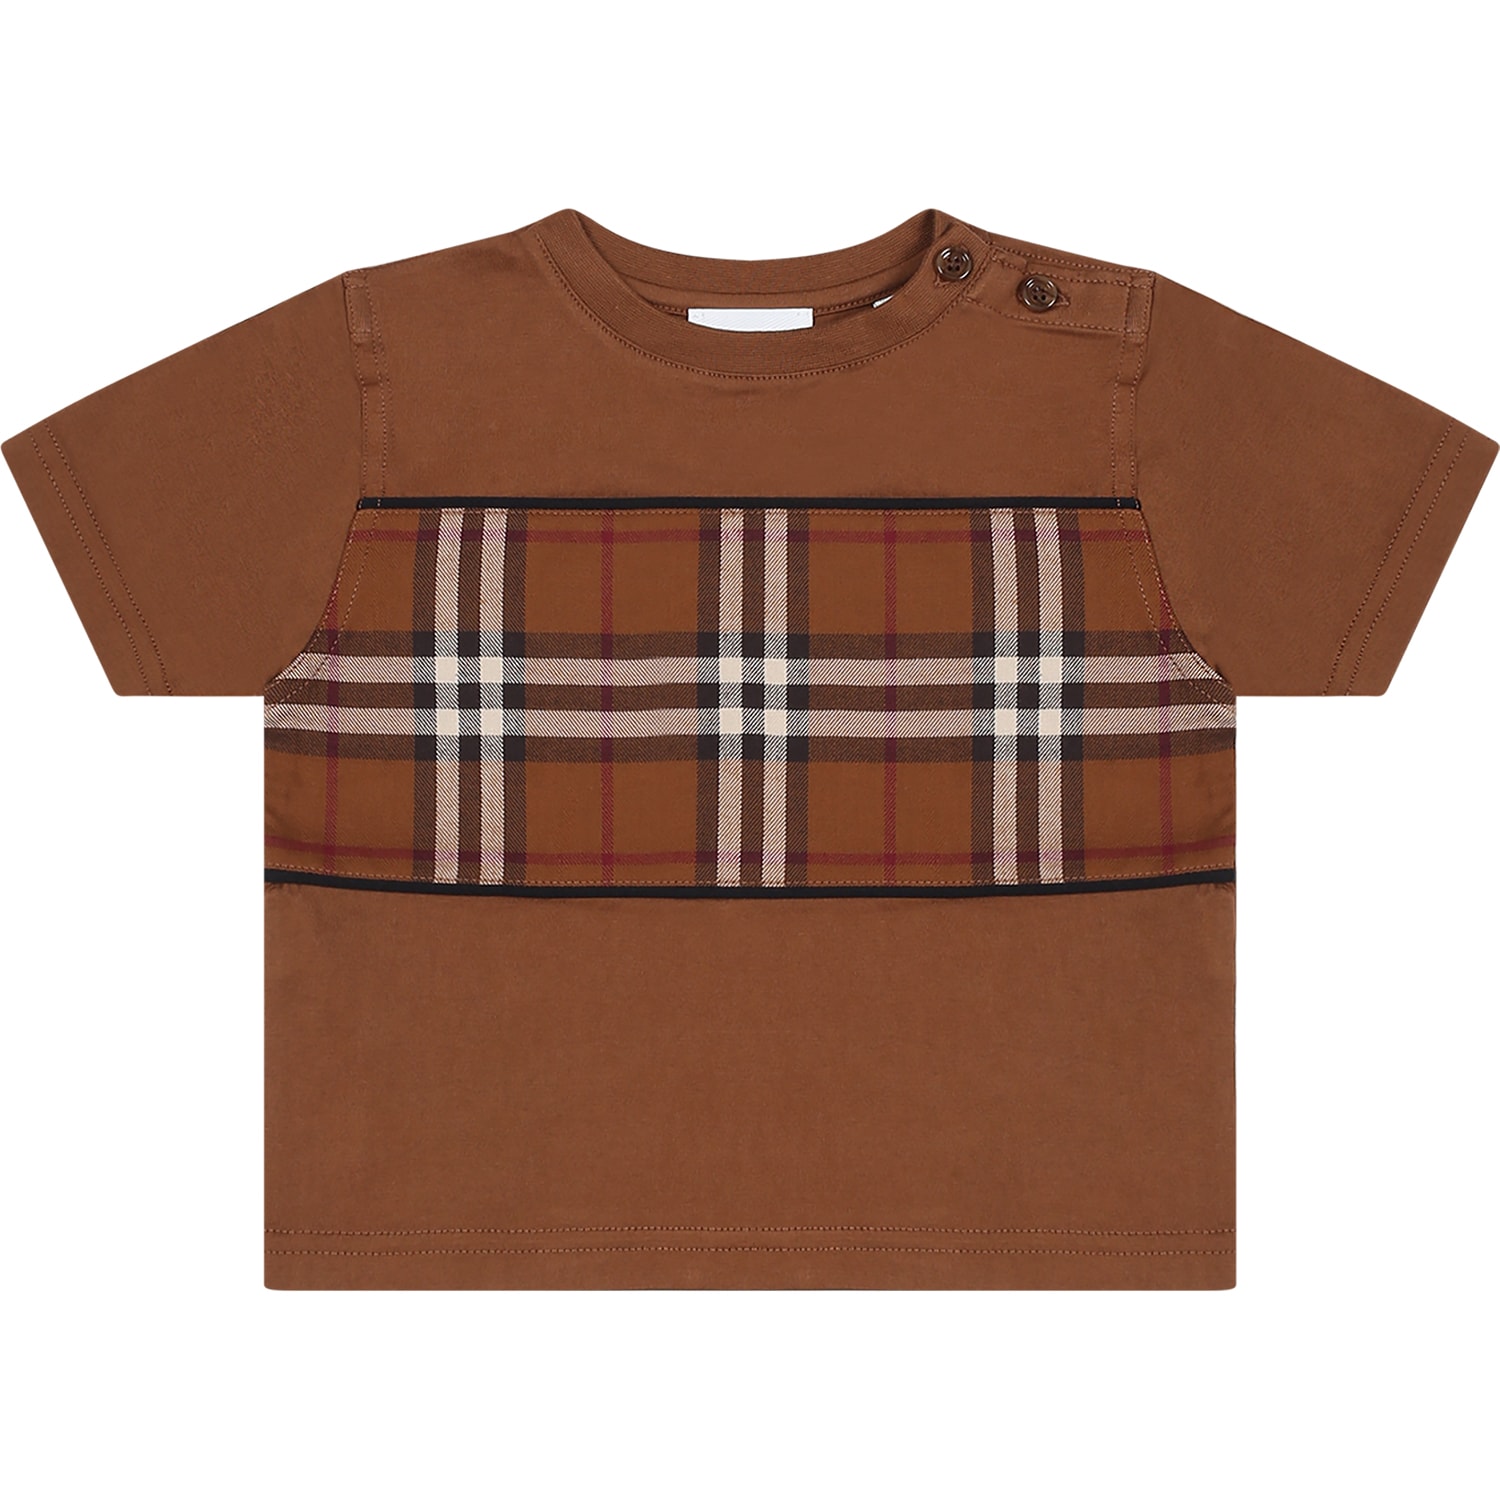 BURBERRY BROWN T-SHIRT FOR BABY BOY WITH ICONIC CHECK